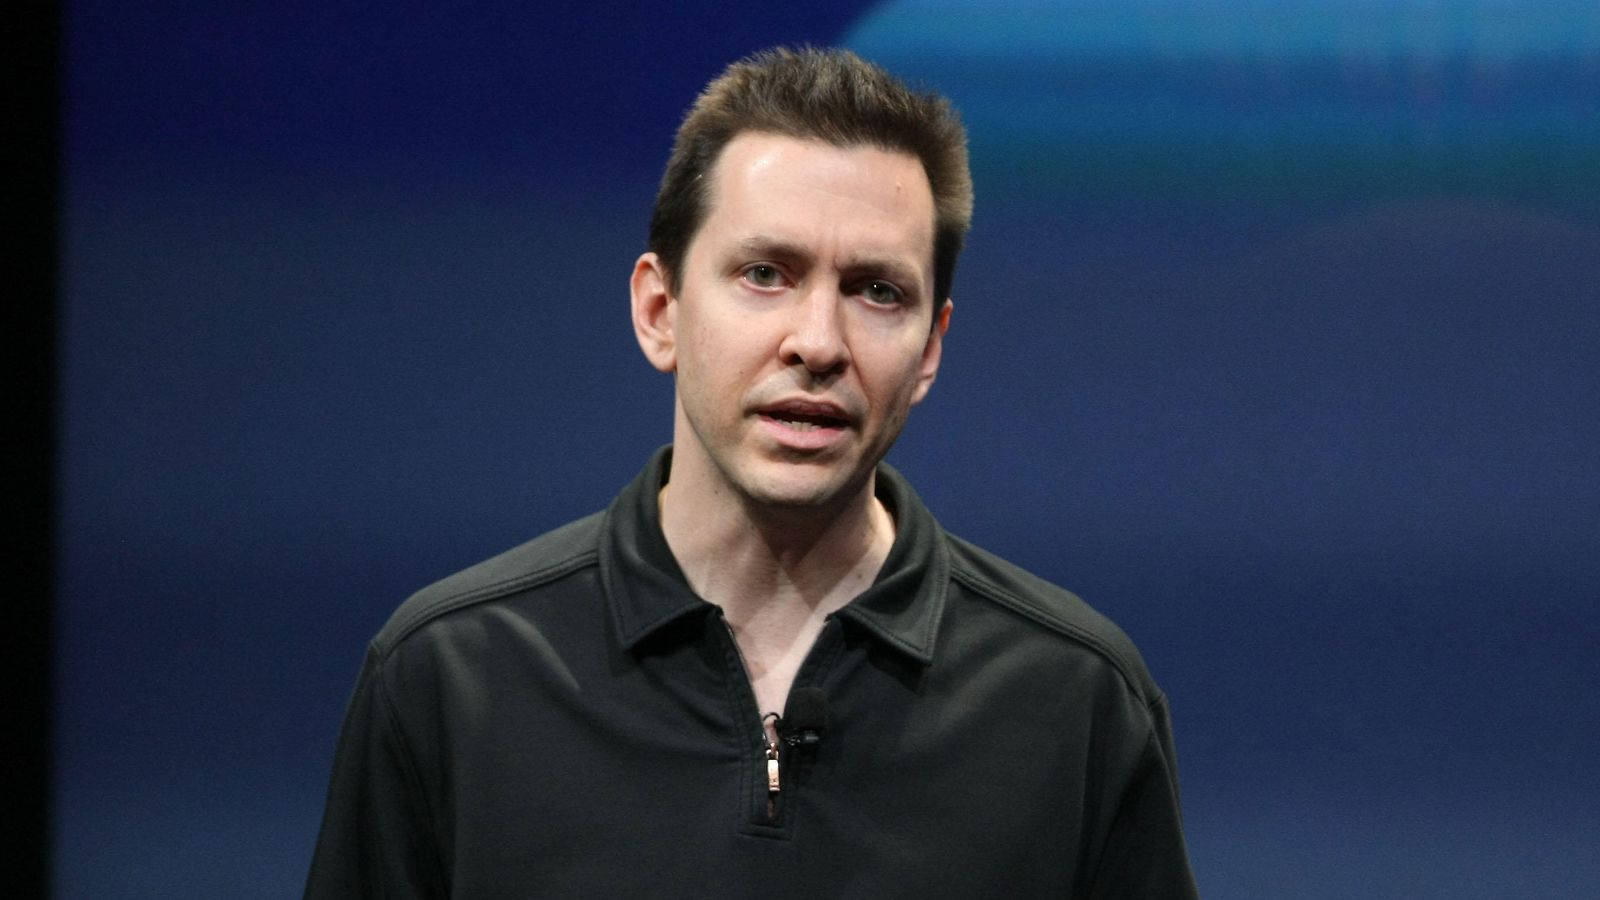 Scott Forstall And His Vision In A Presentation Wallpaper